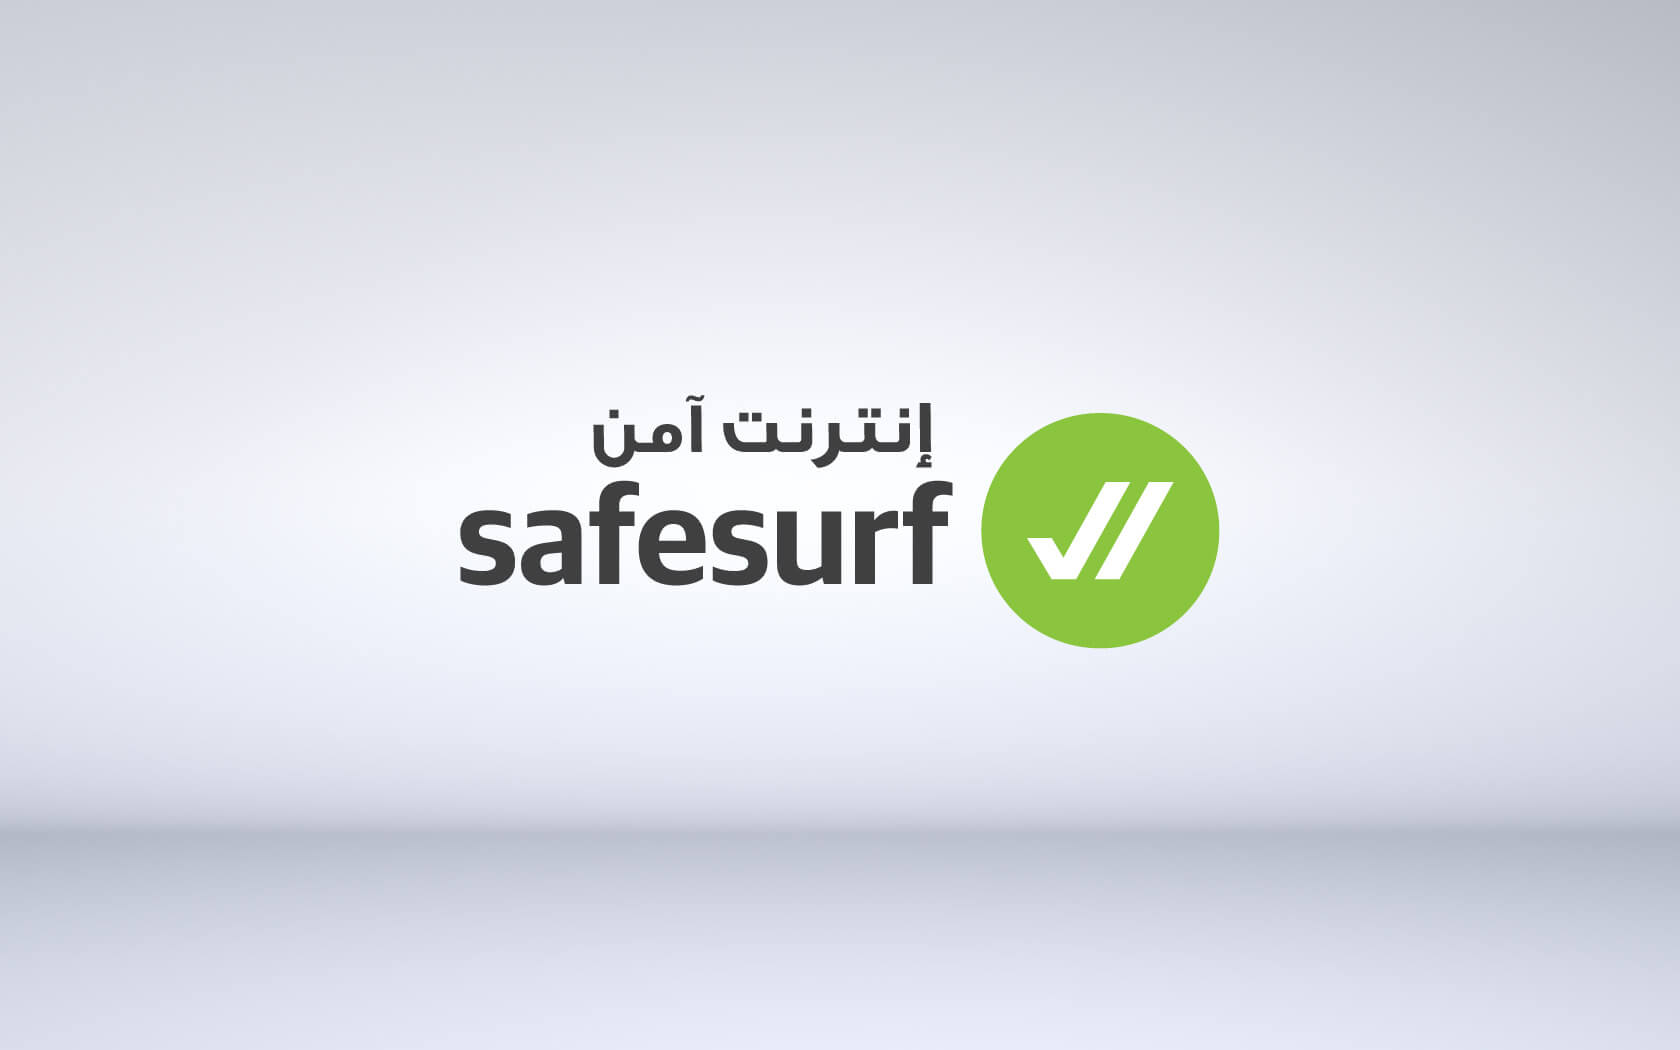 Safe Surf Logo - Safe Internet campaign and identity fully integrated for TRA